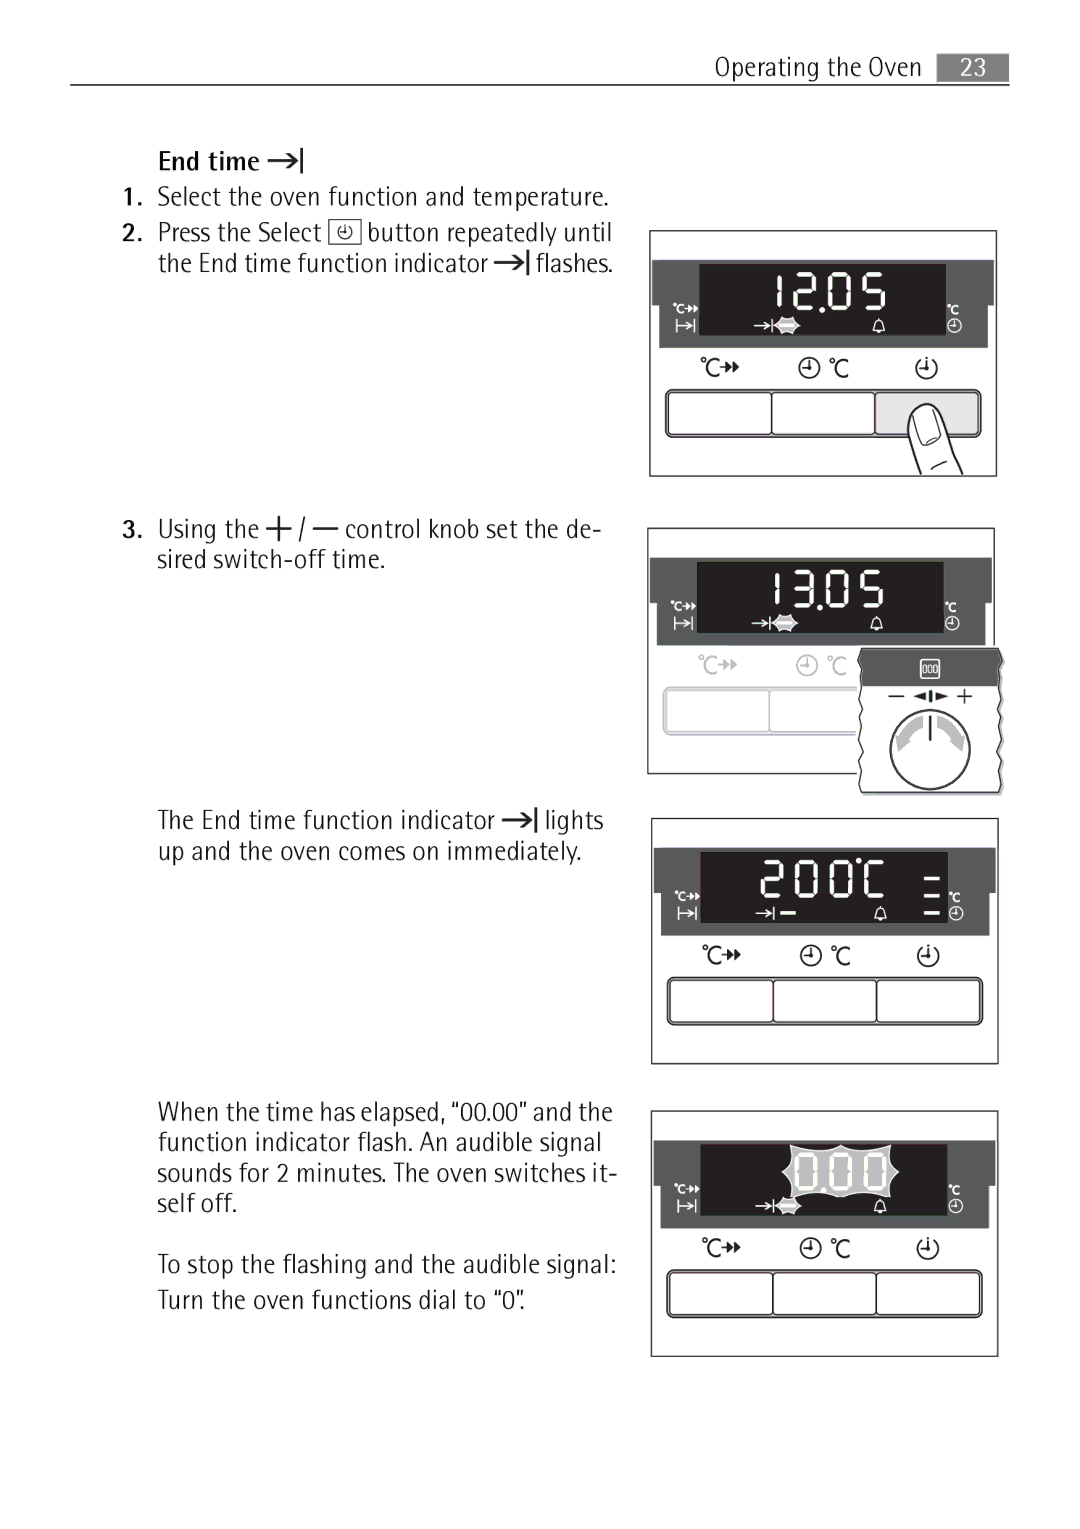 Electrolux B57415A, B57415B user manual Select the oven function and temperature 